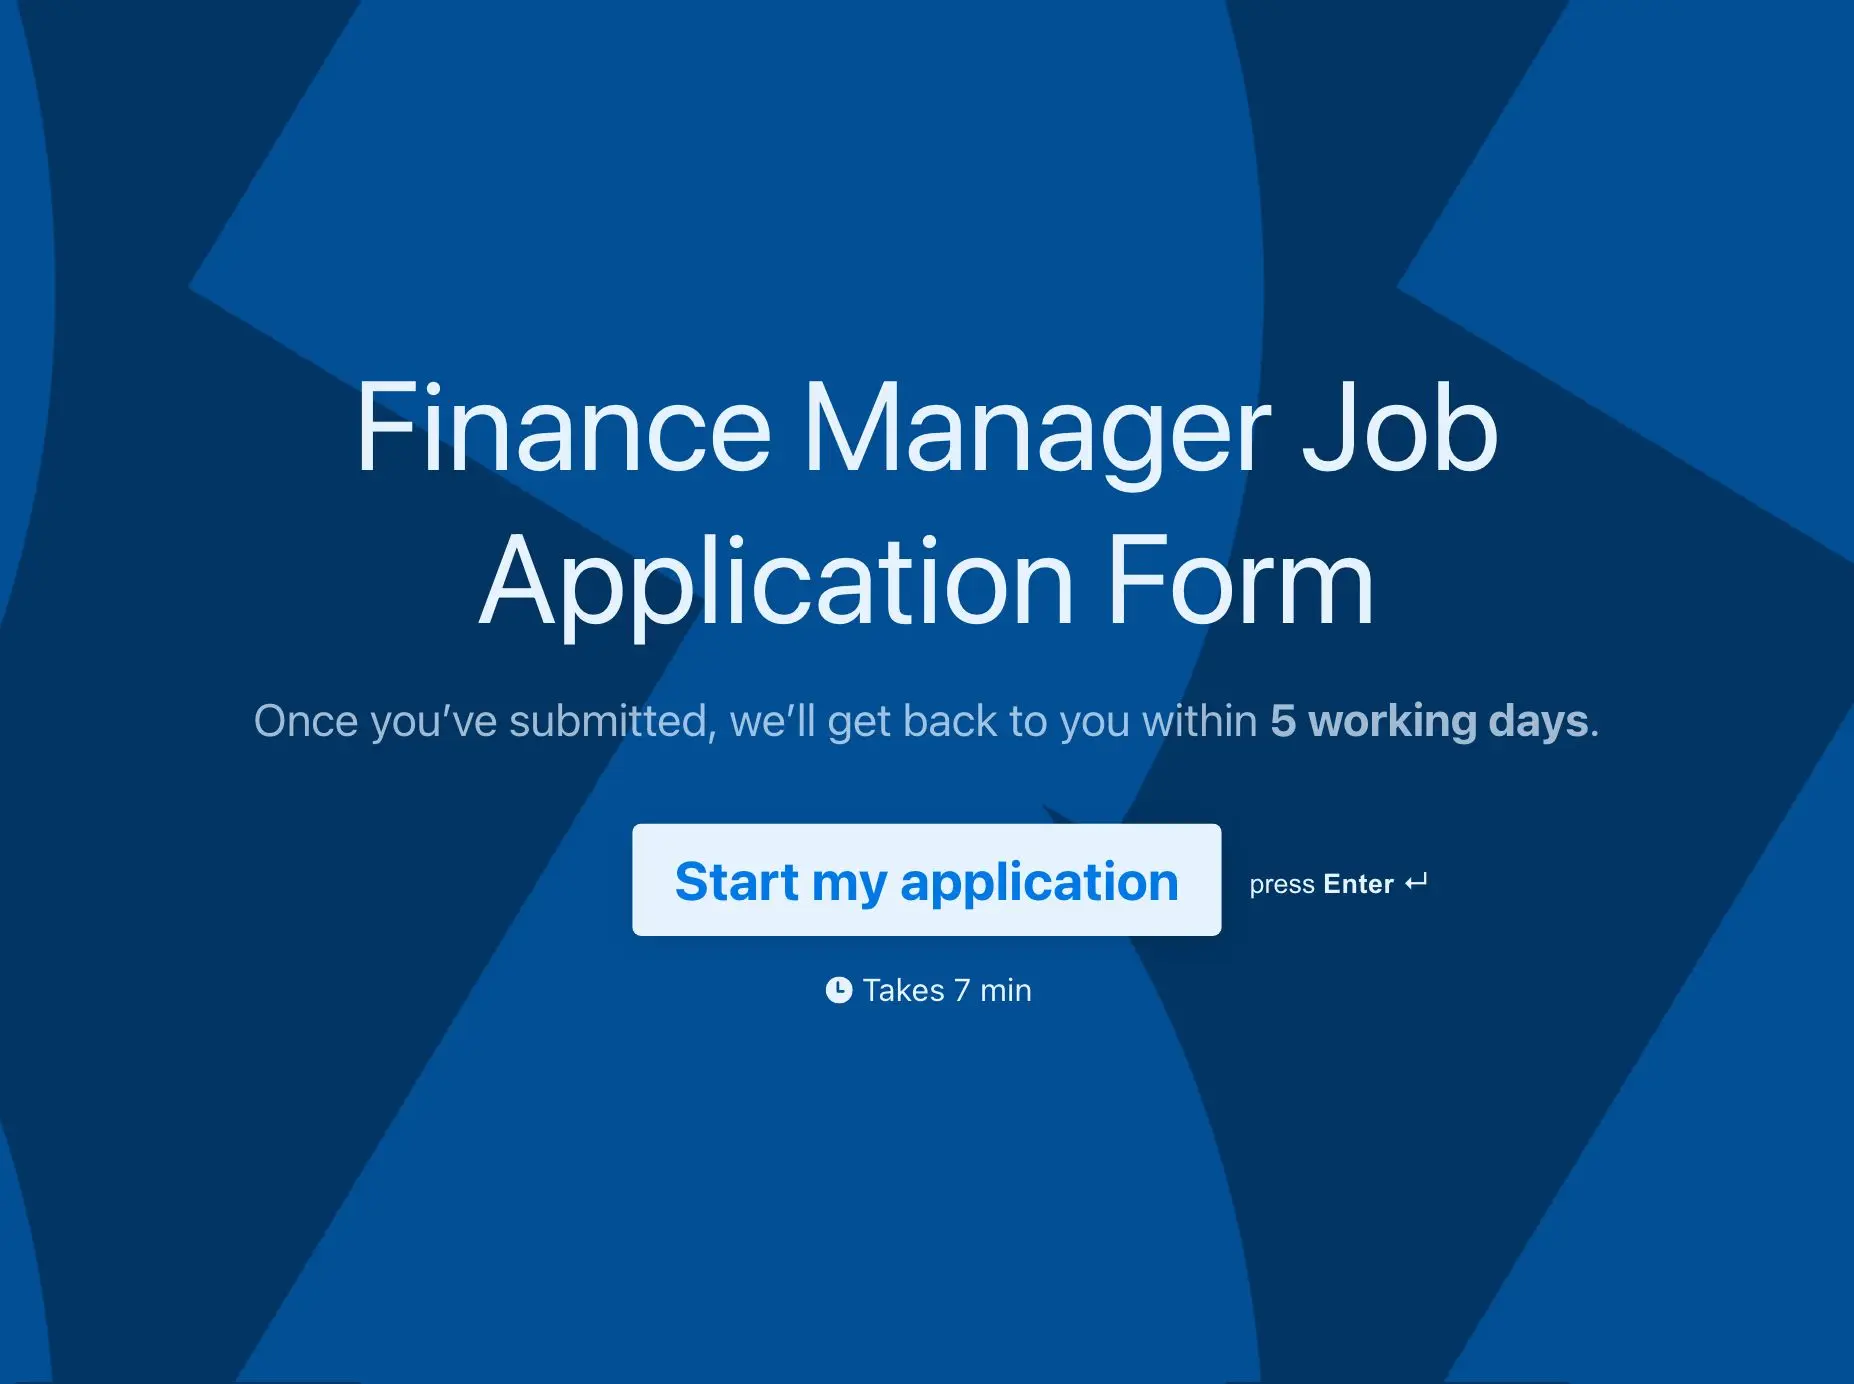 Finance Manager Job Application Form Template Hero